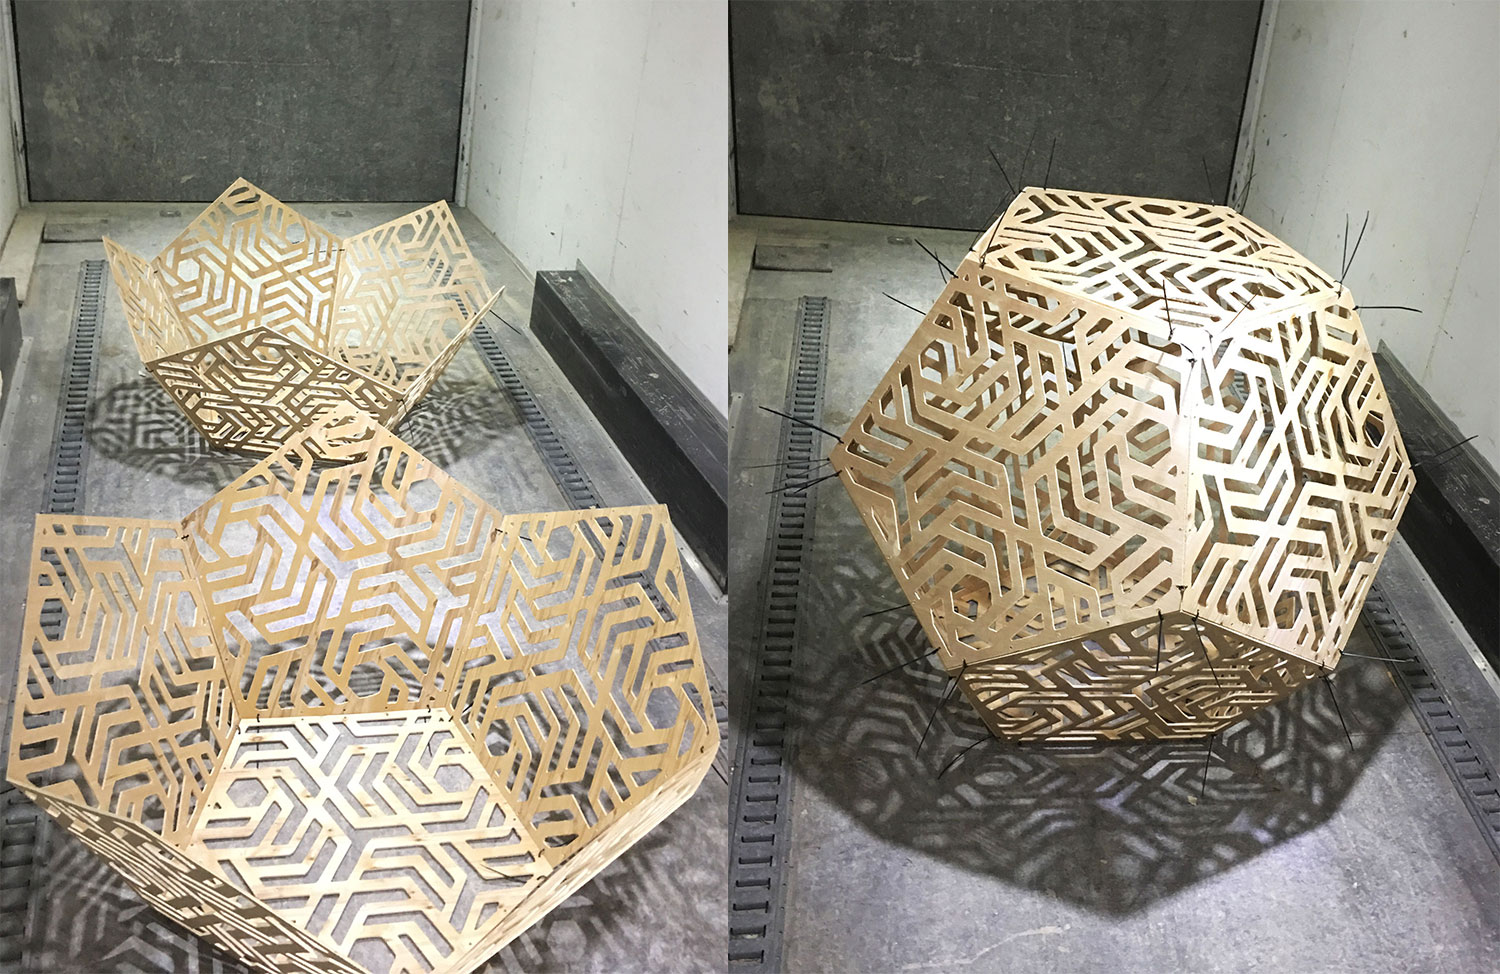 two halves of a decahedron laying next to each other and a completed decahedron .